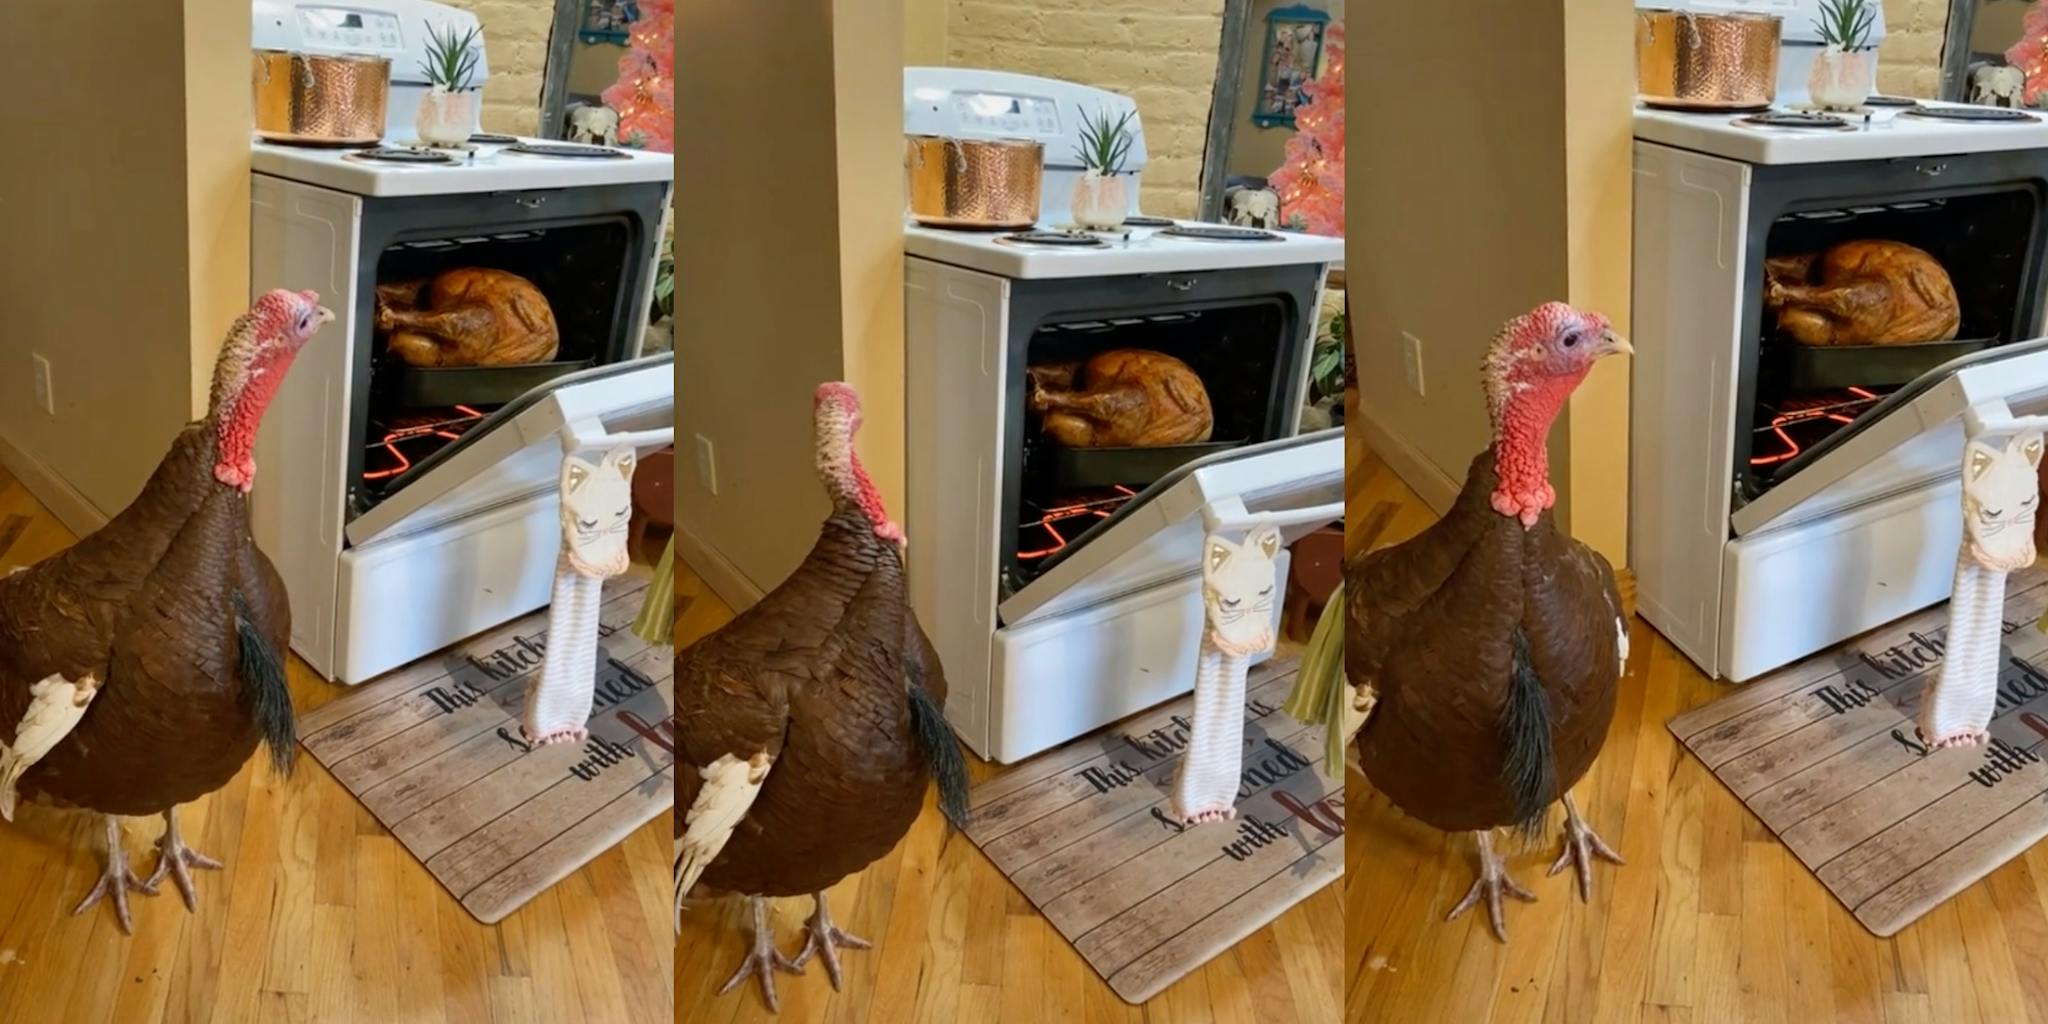 TikTok showing a live turkey next to one that is baking for Thanksgiving sparks massive debate